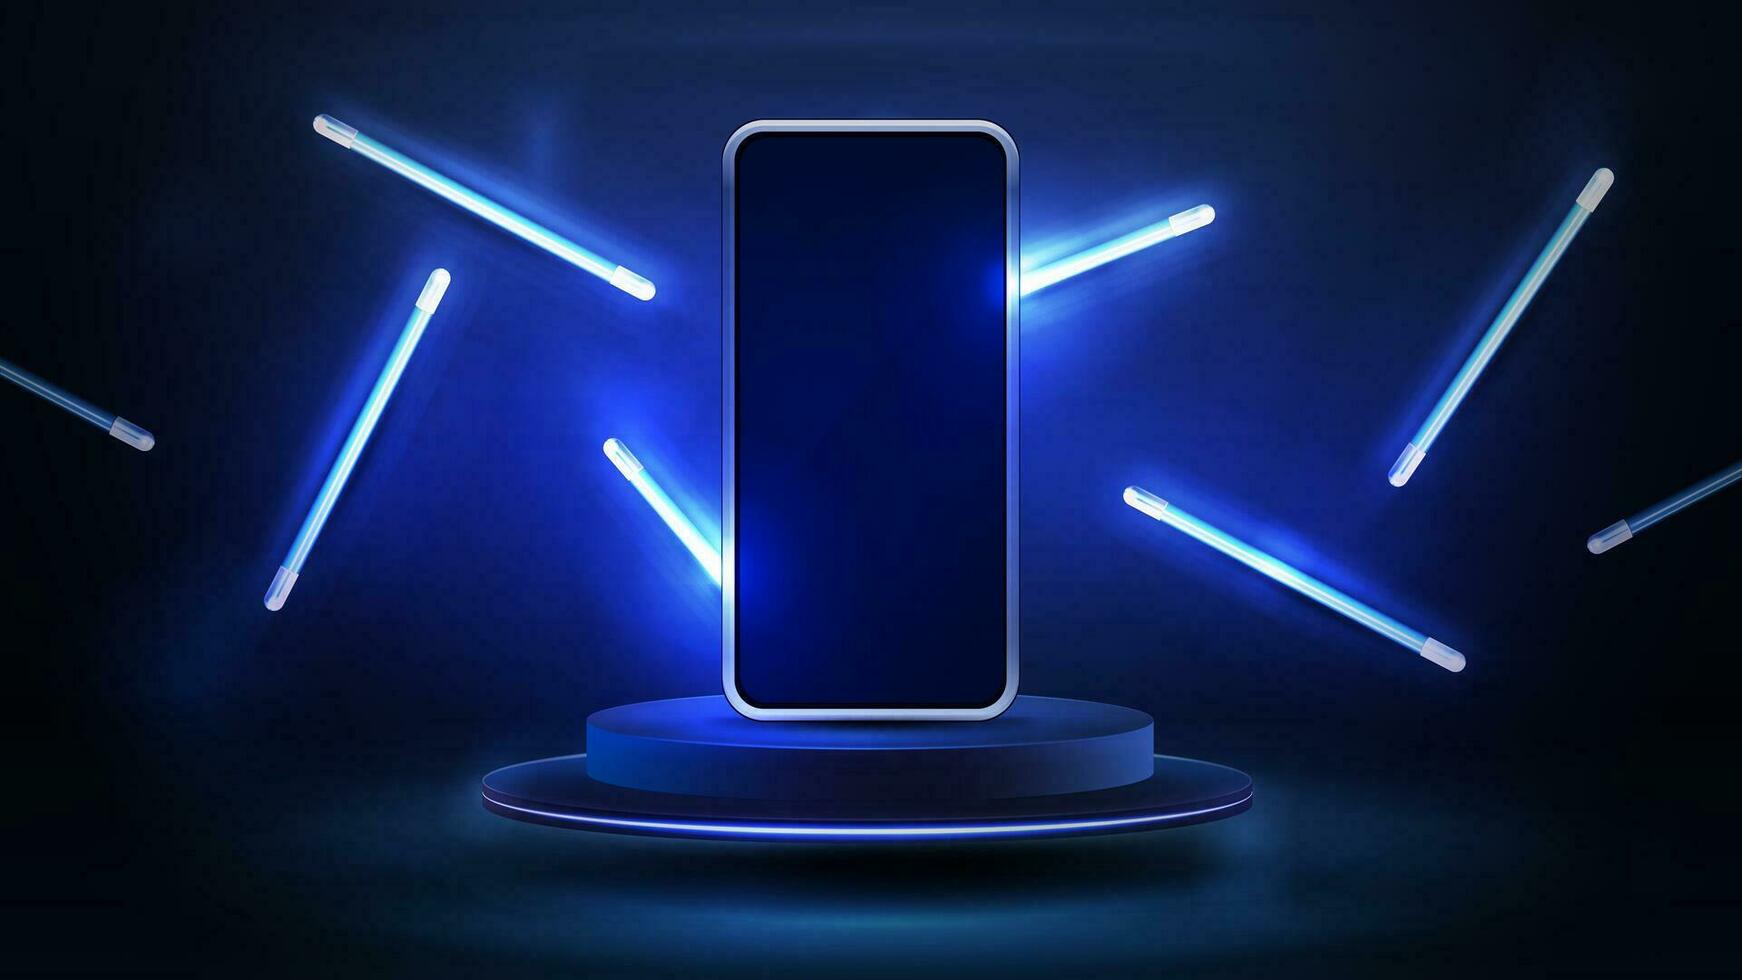 Smartphone on round dark podium with line random flying lamps around, 3d realistic vector illustration. Blue and dark digital scene with phone mockup